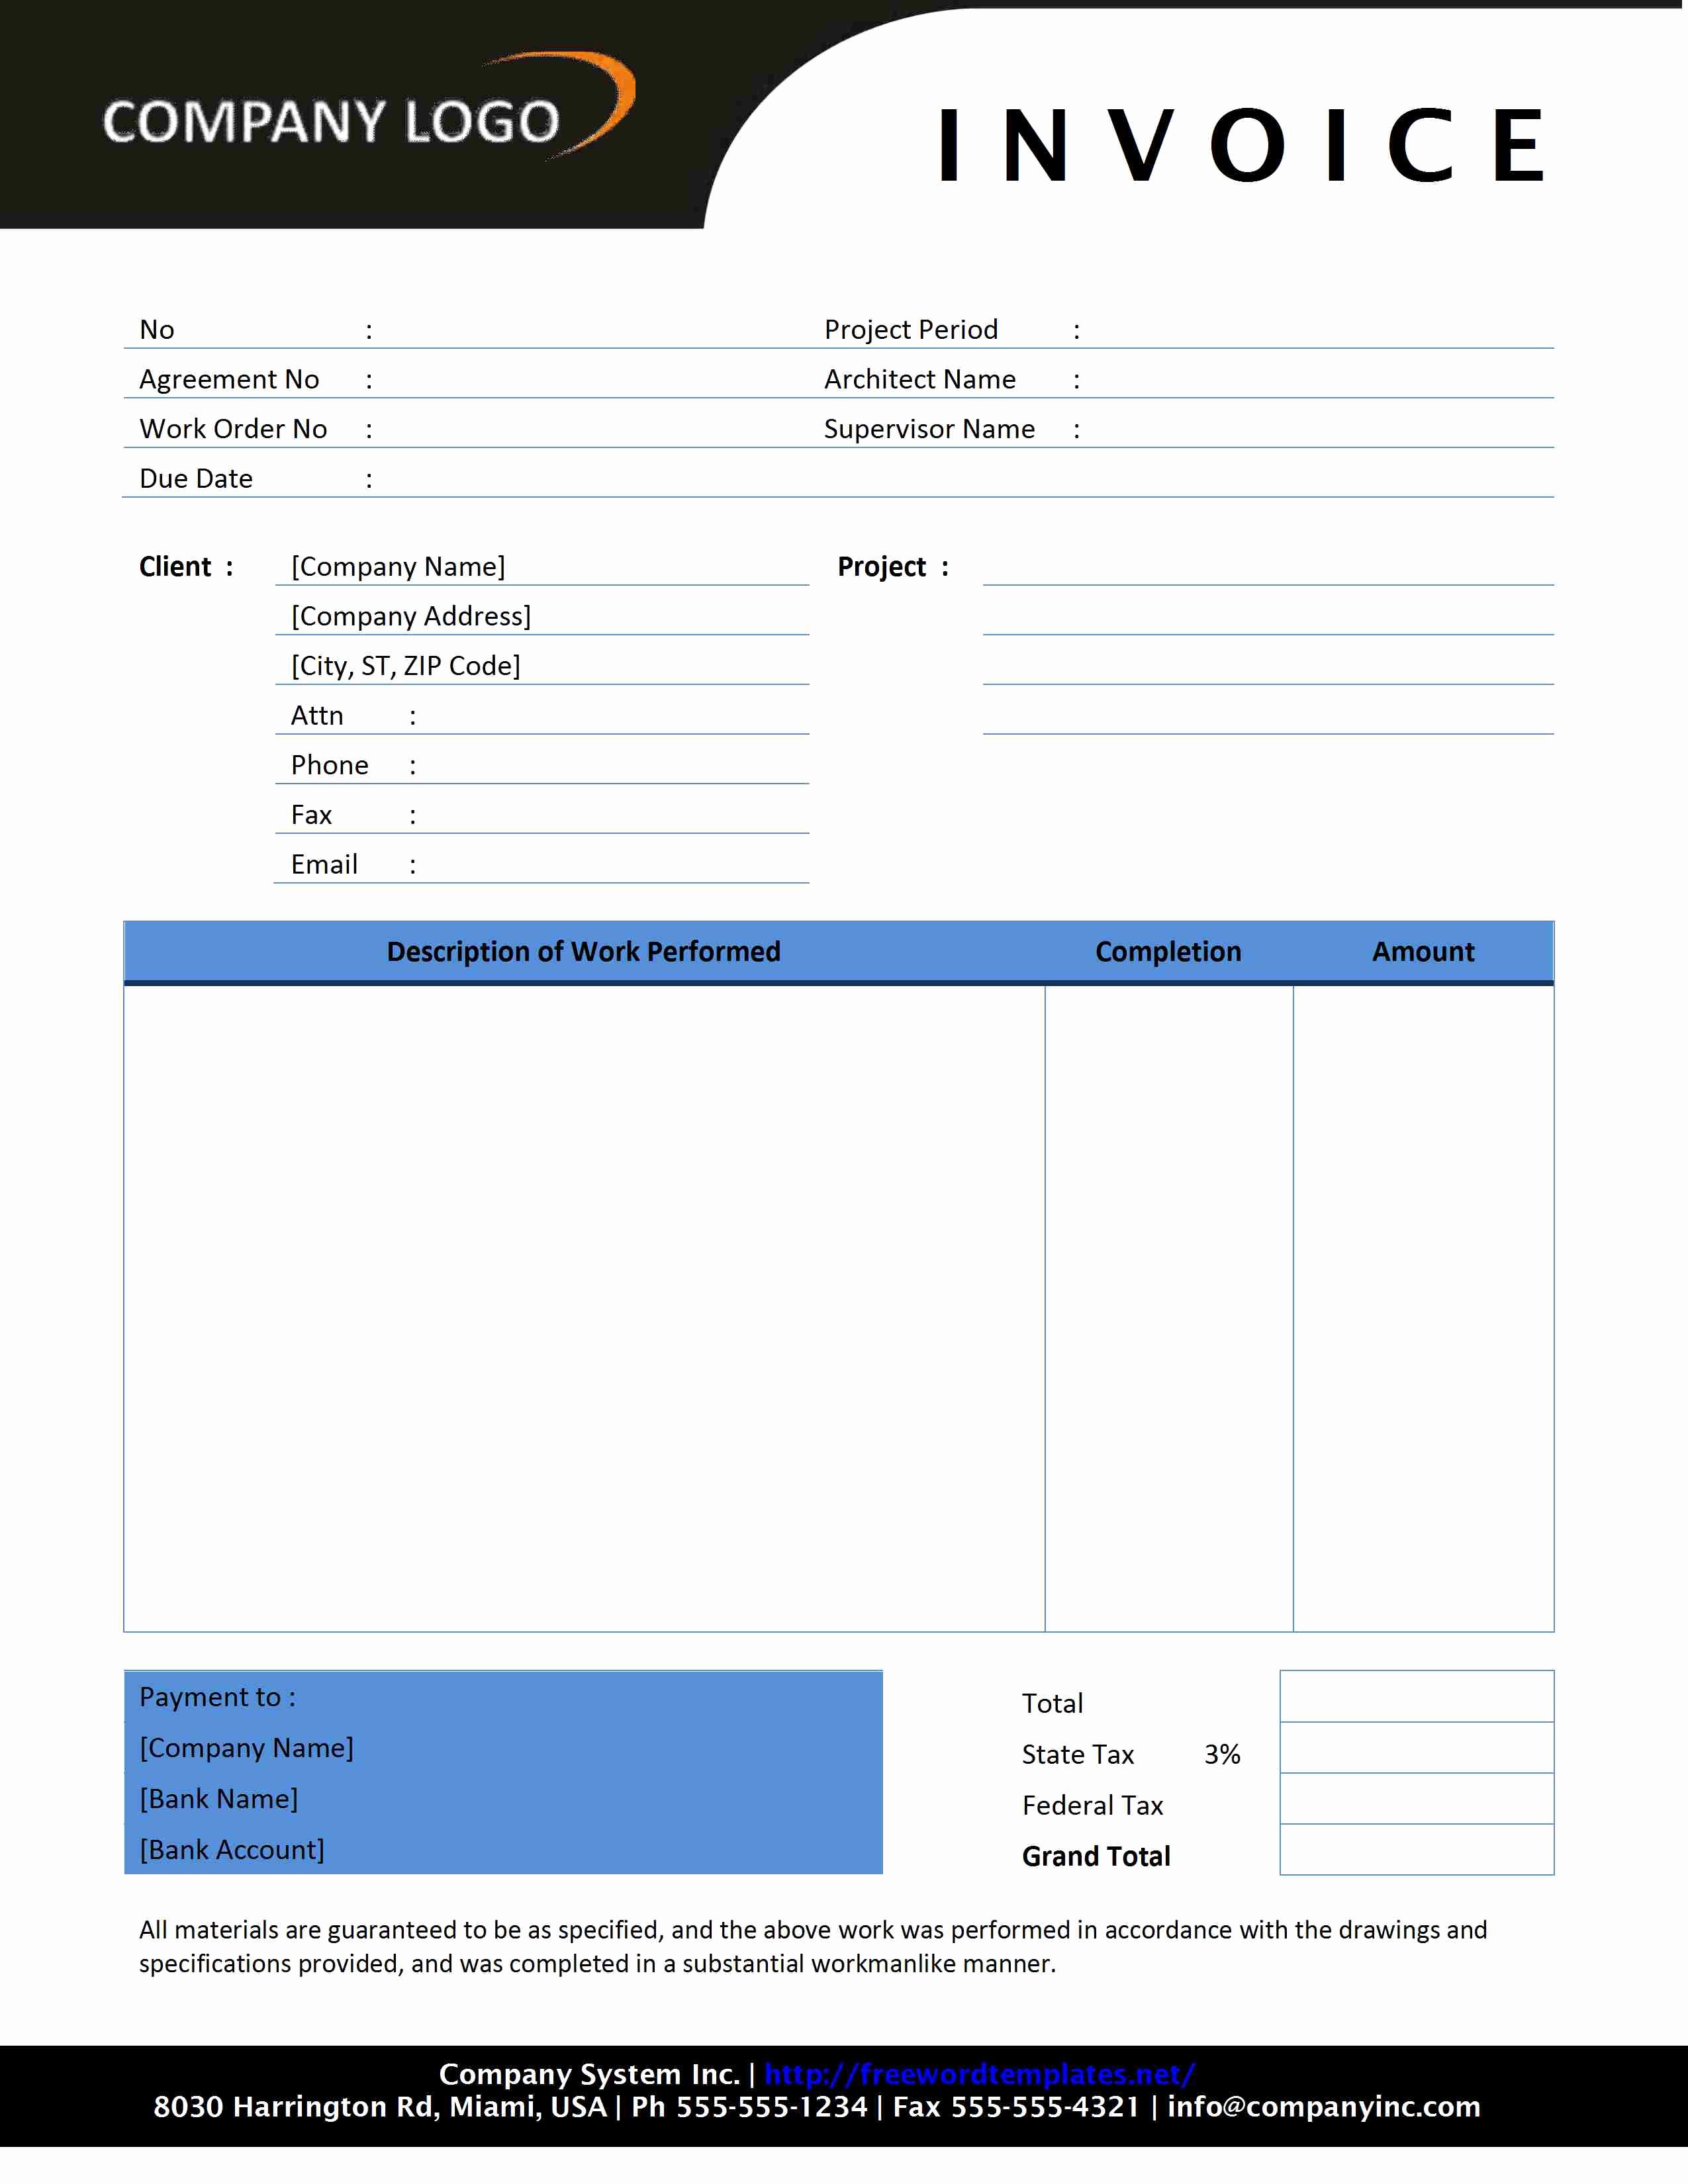 Download Invoice Template for Mac Lovely Invoice Template for Uk Best Sample Invoiceate Simple Word